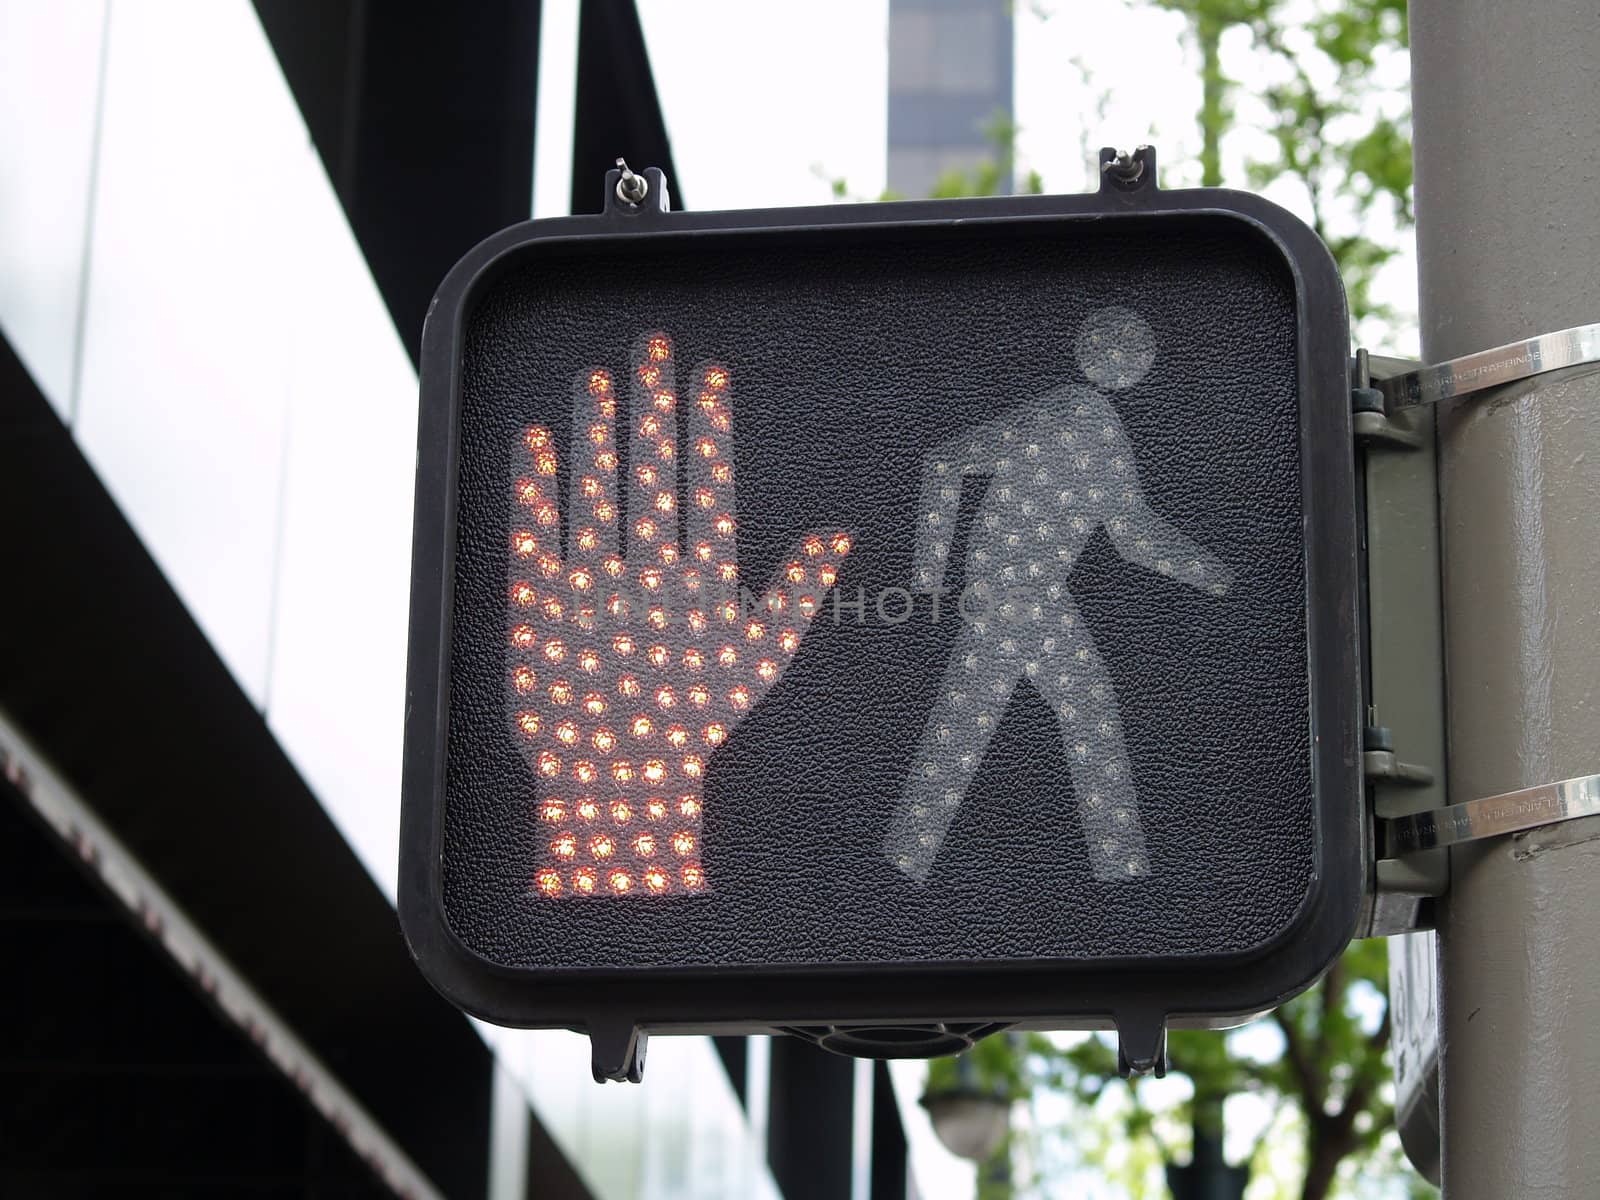 Modern crossing sign with stop hand showing.